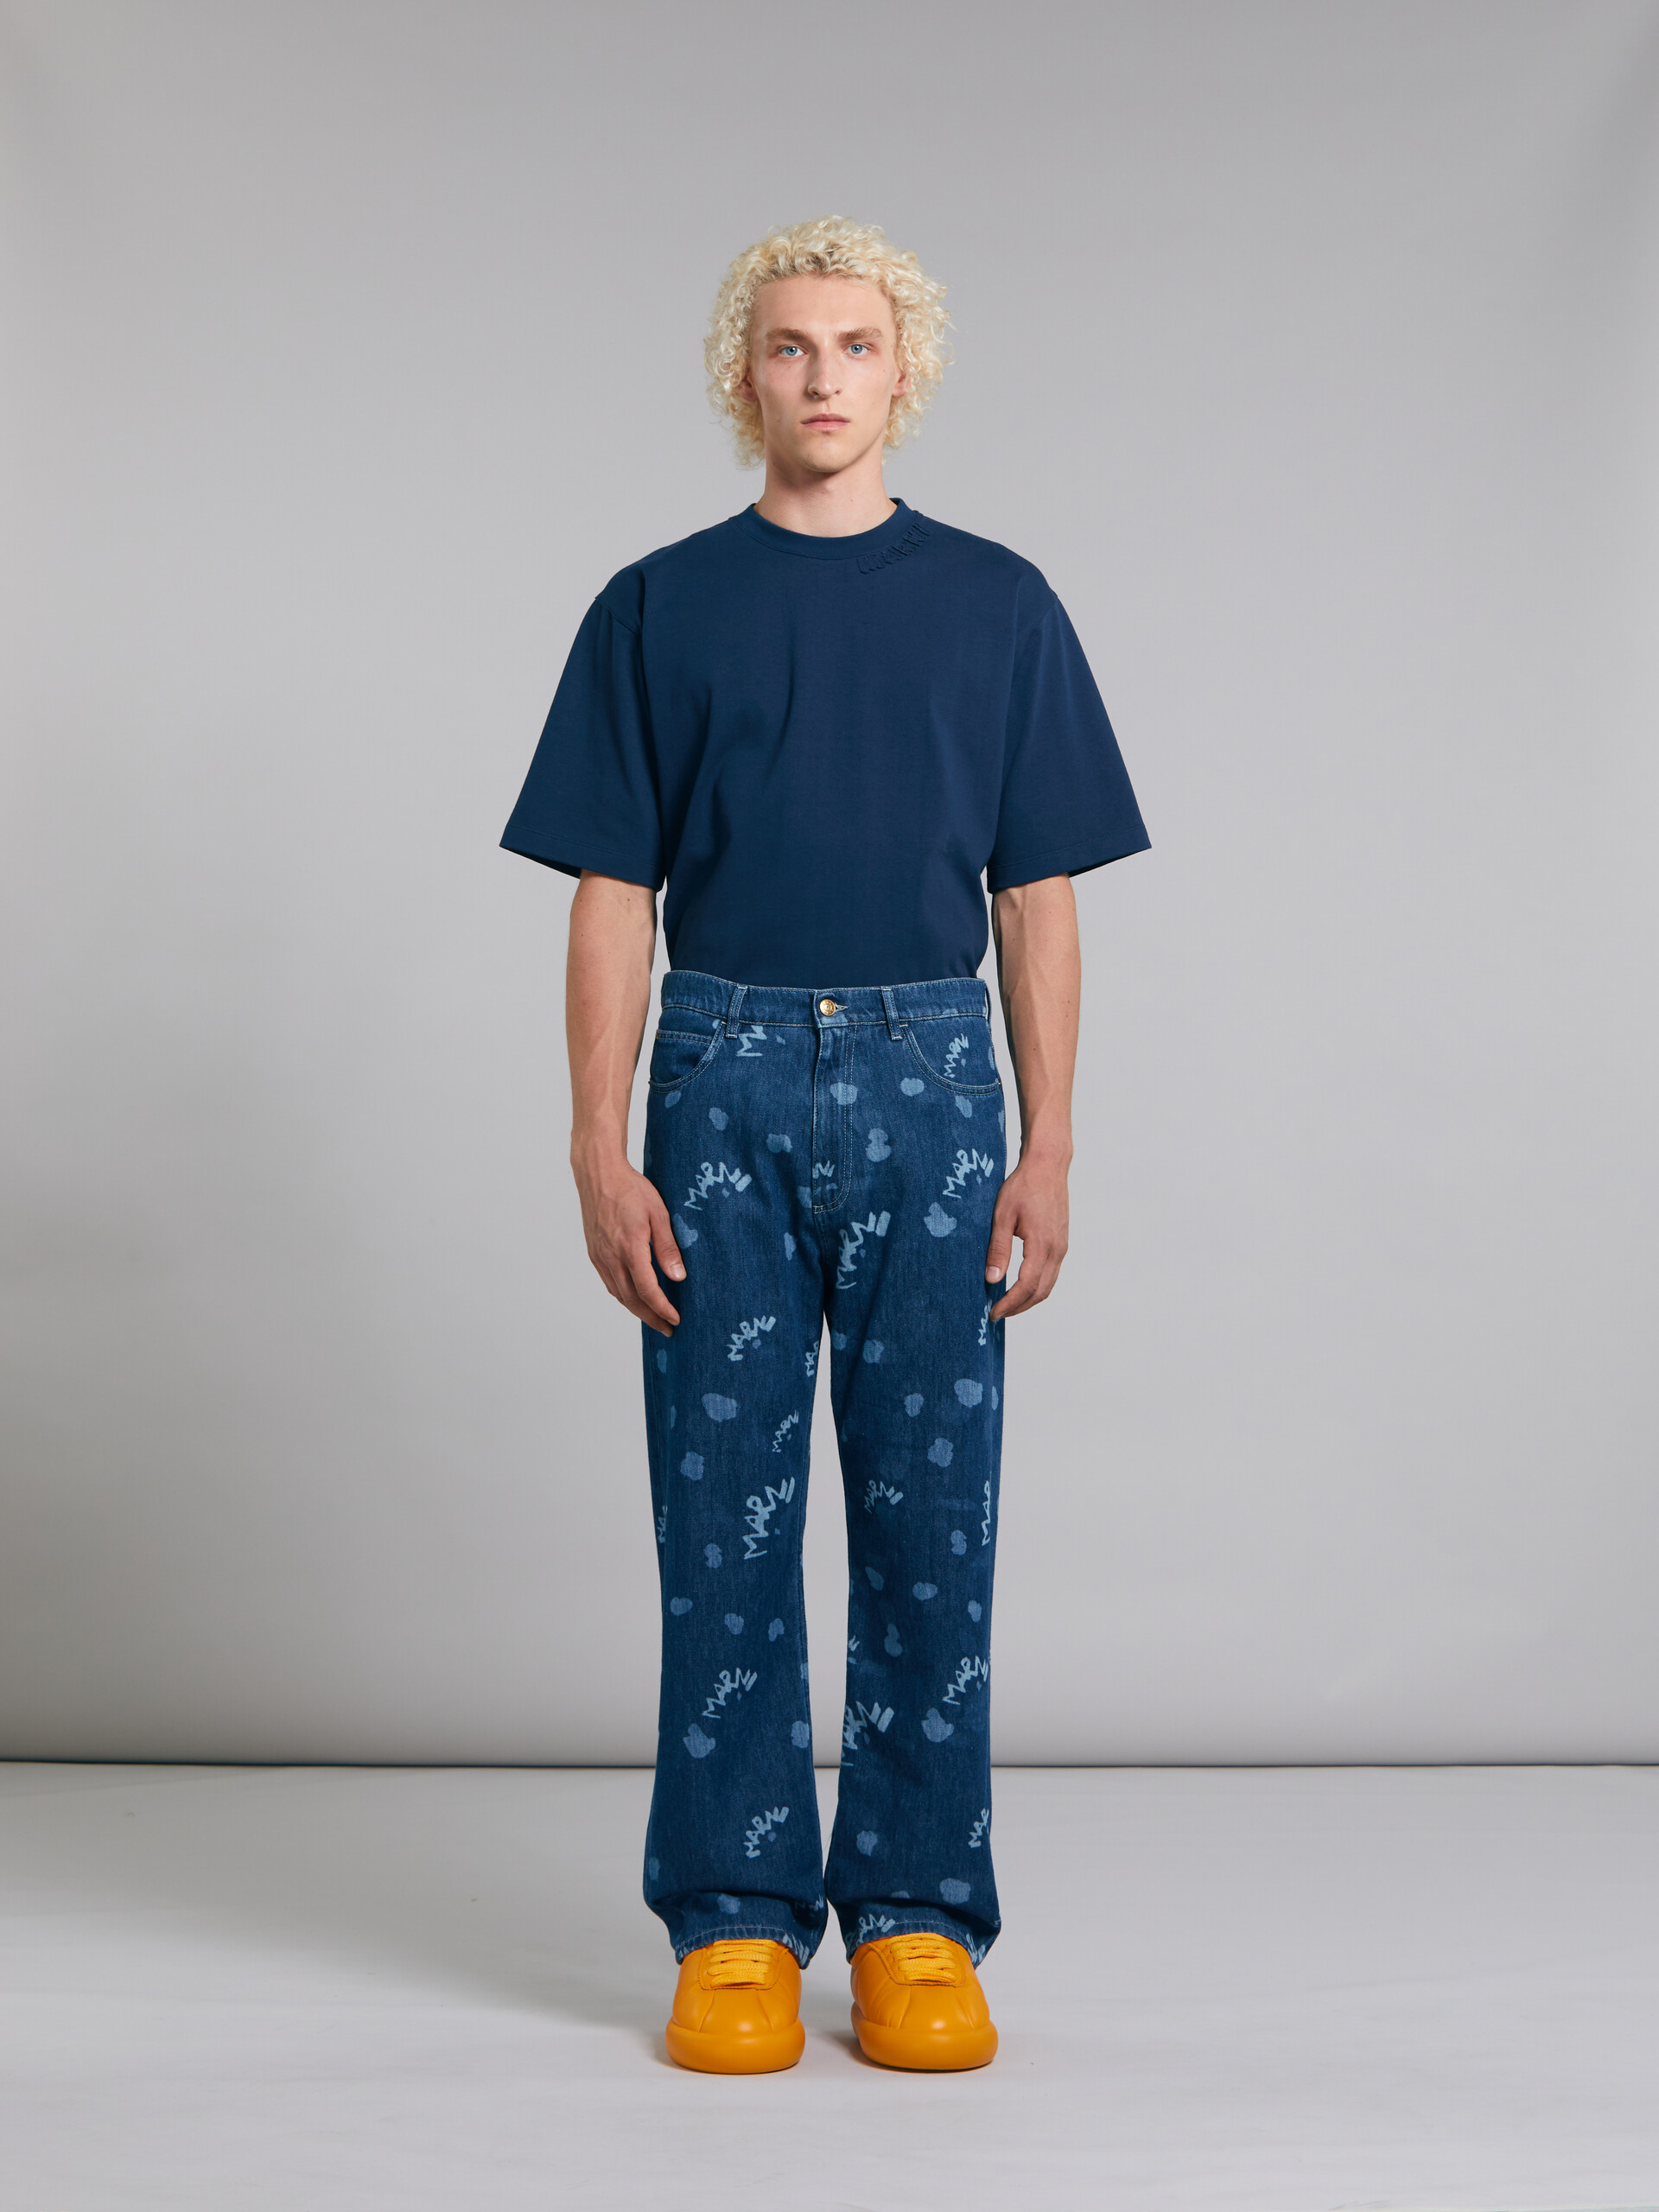 Blue denim jeans with Marni Dripping print - Pants - Image 2